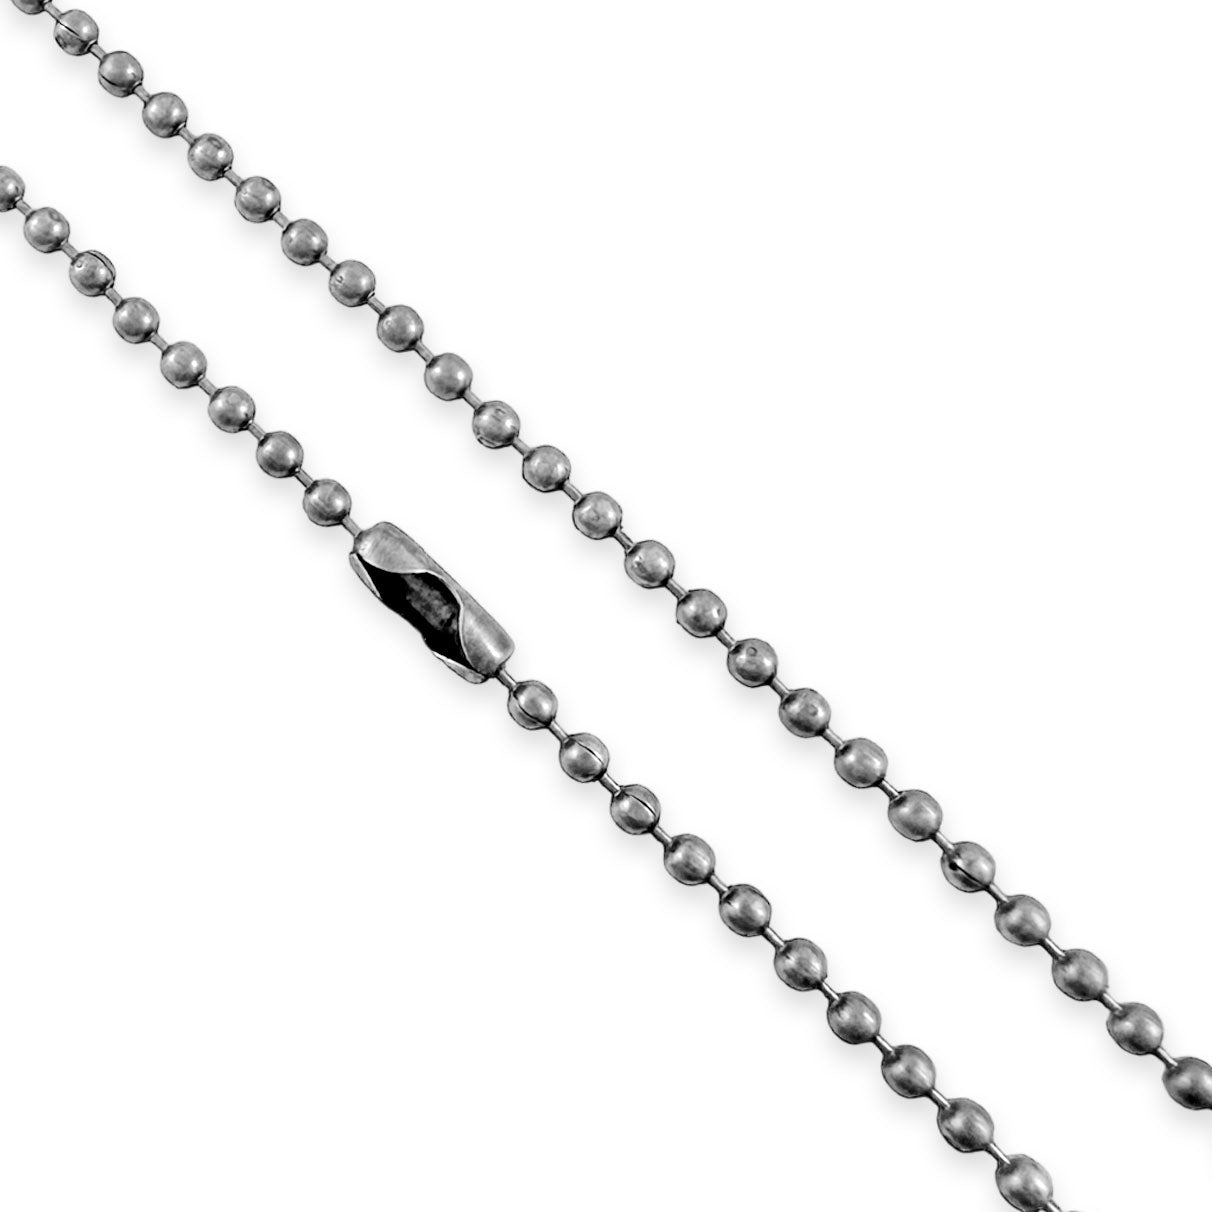 Bulk Antique Silver Ball Chain Necklaces 24" Made in USA - Select Quantity